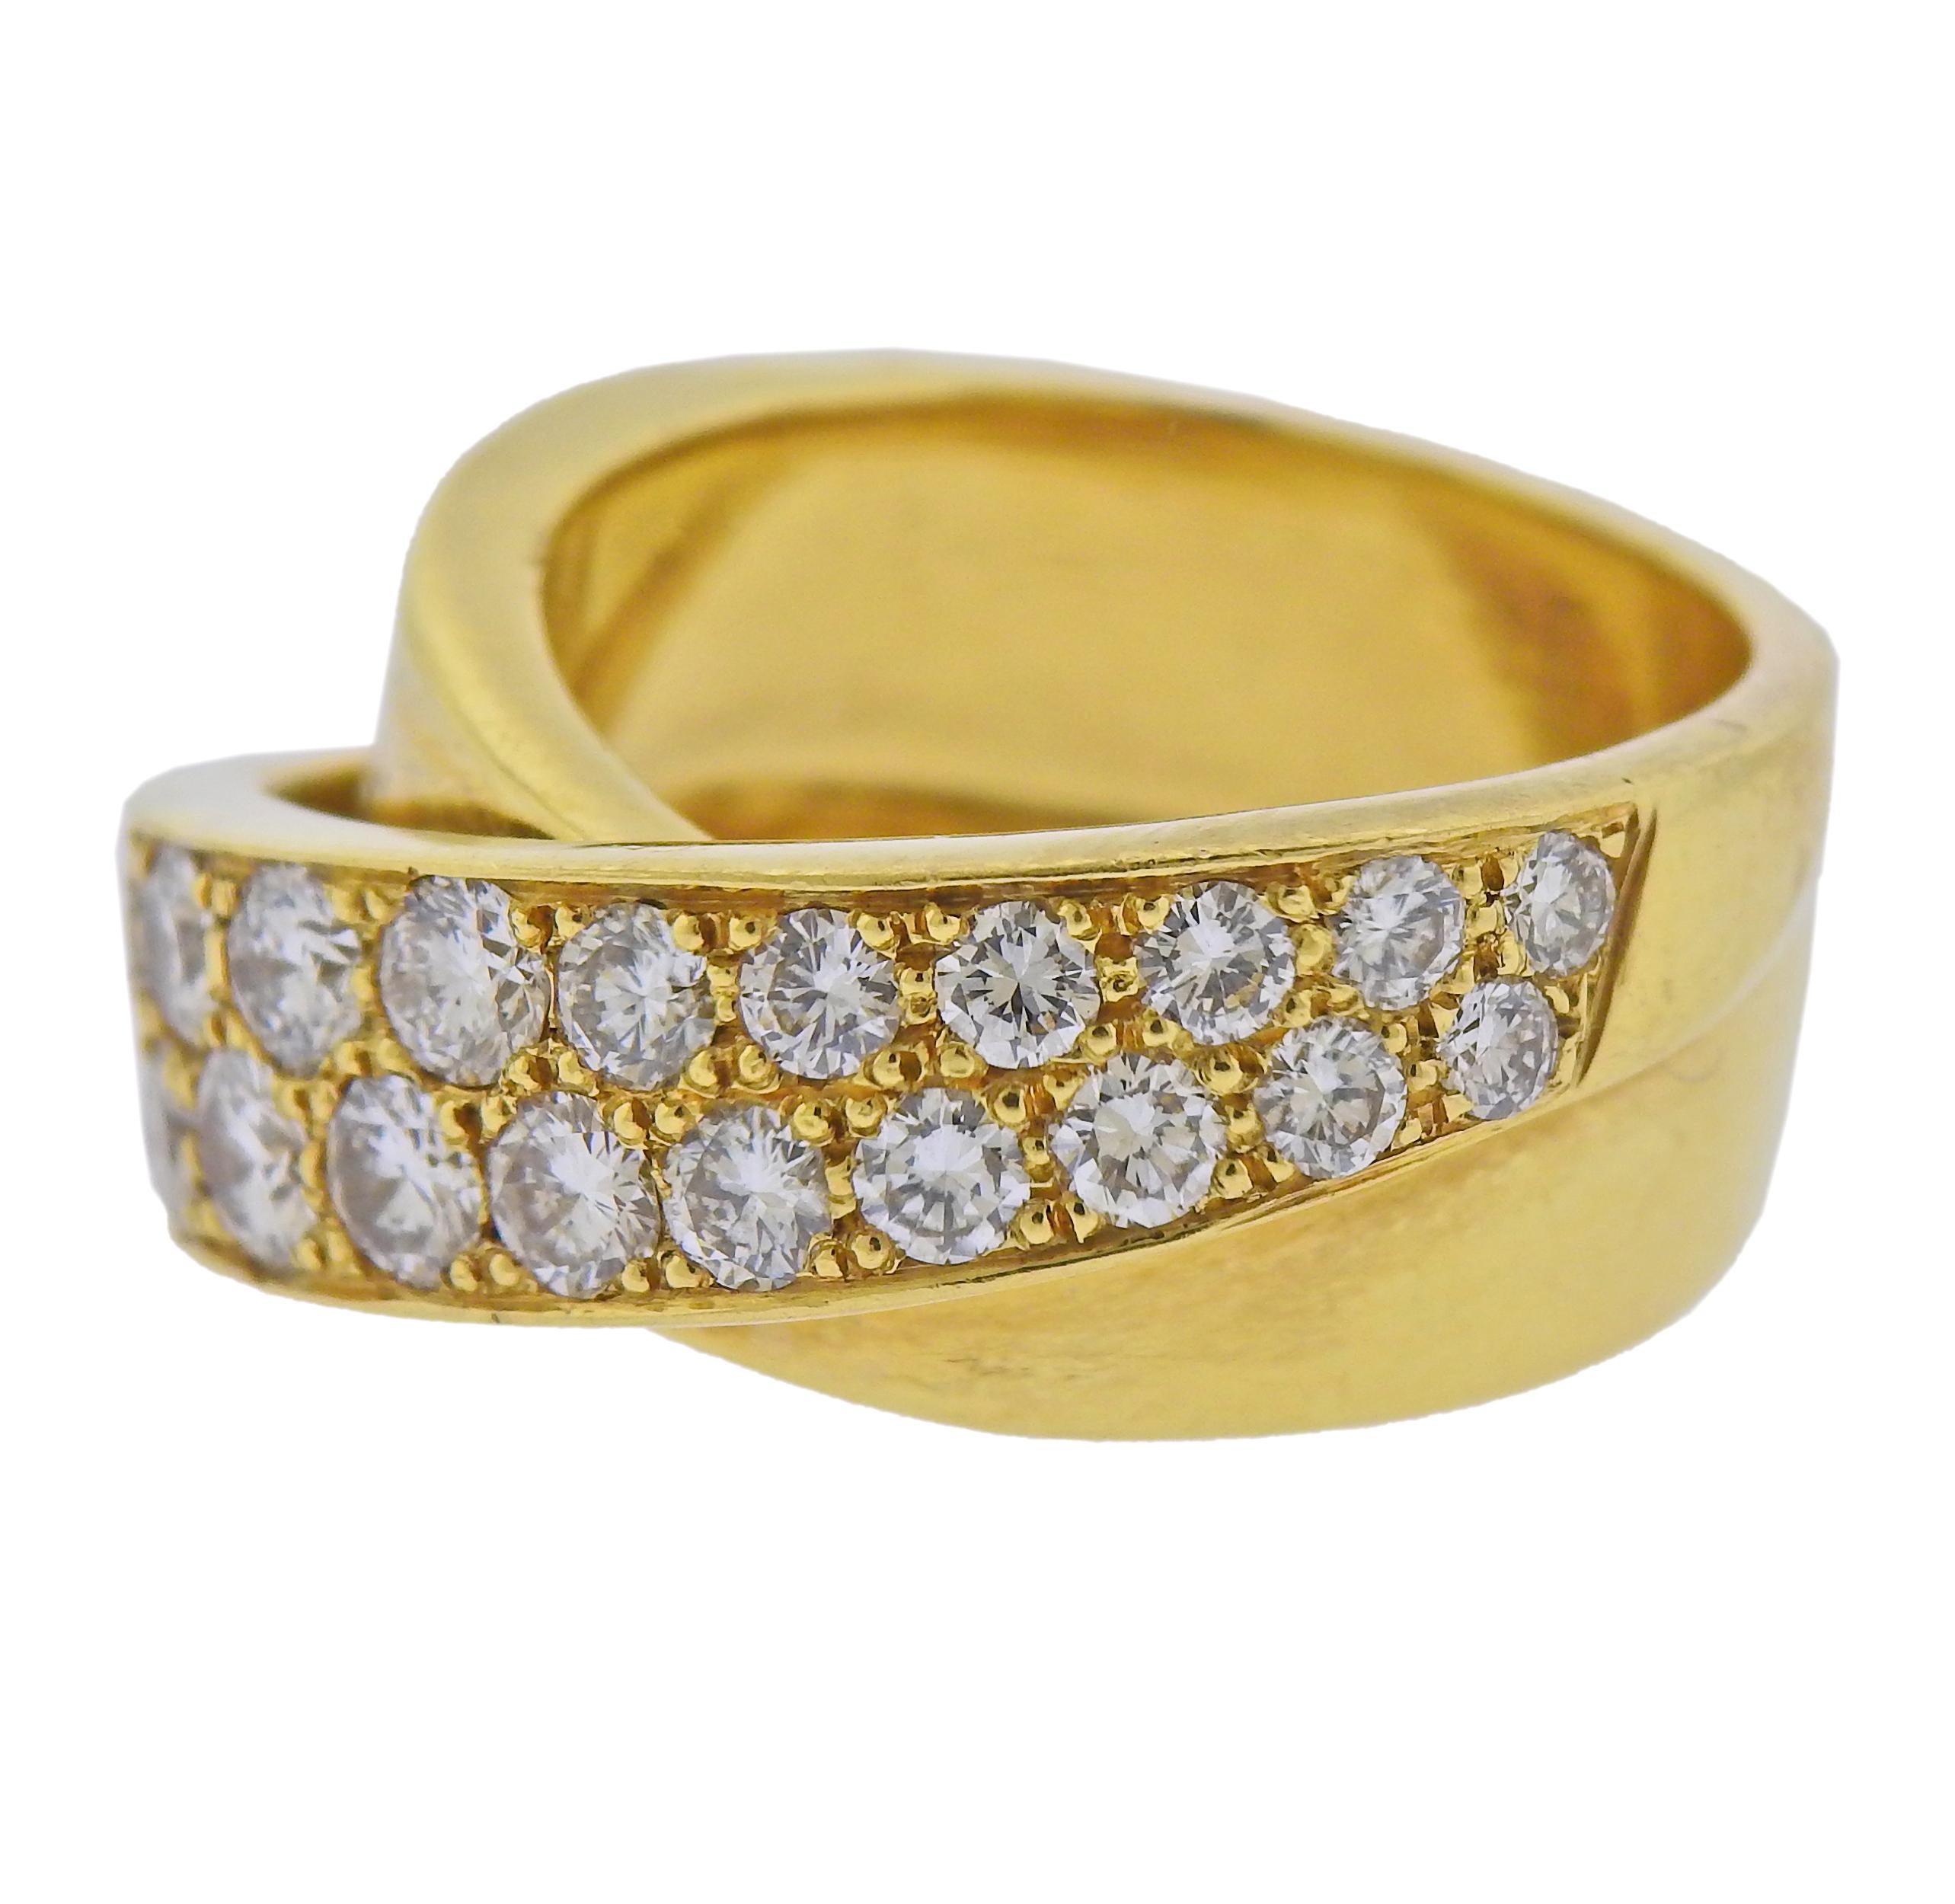 18k yellow gold crossover ring with approx. 3.00ctw in diamonds. Ring size - 9, ring top is 13mm wide. Minor dents are present. Marked: 18k. Weight - 26.6 grams.